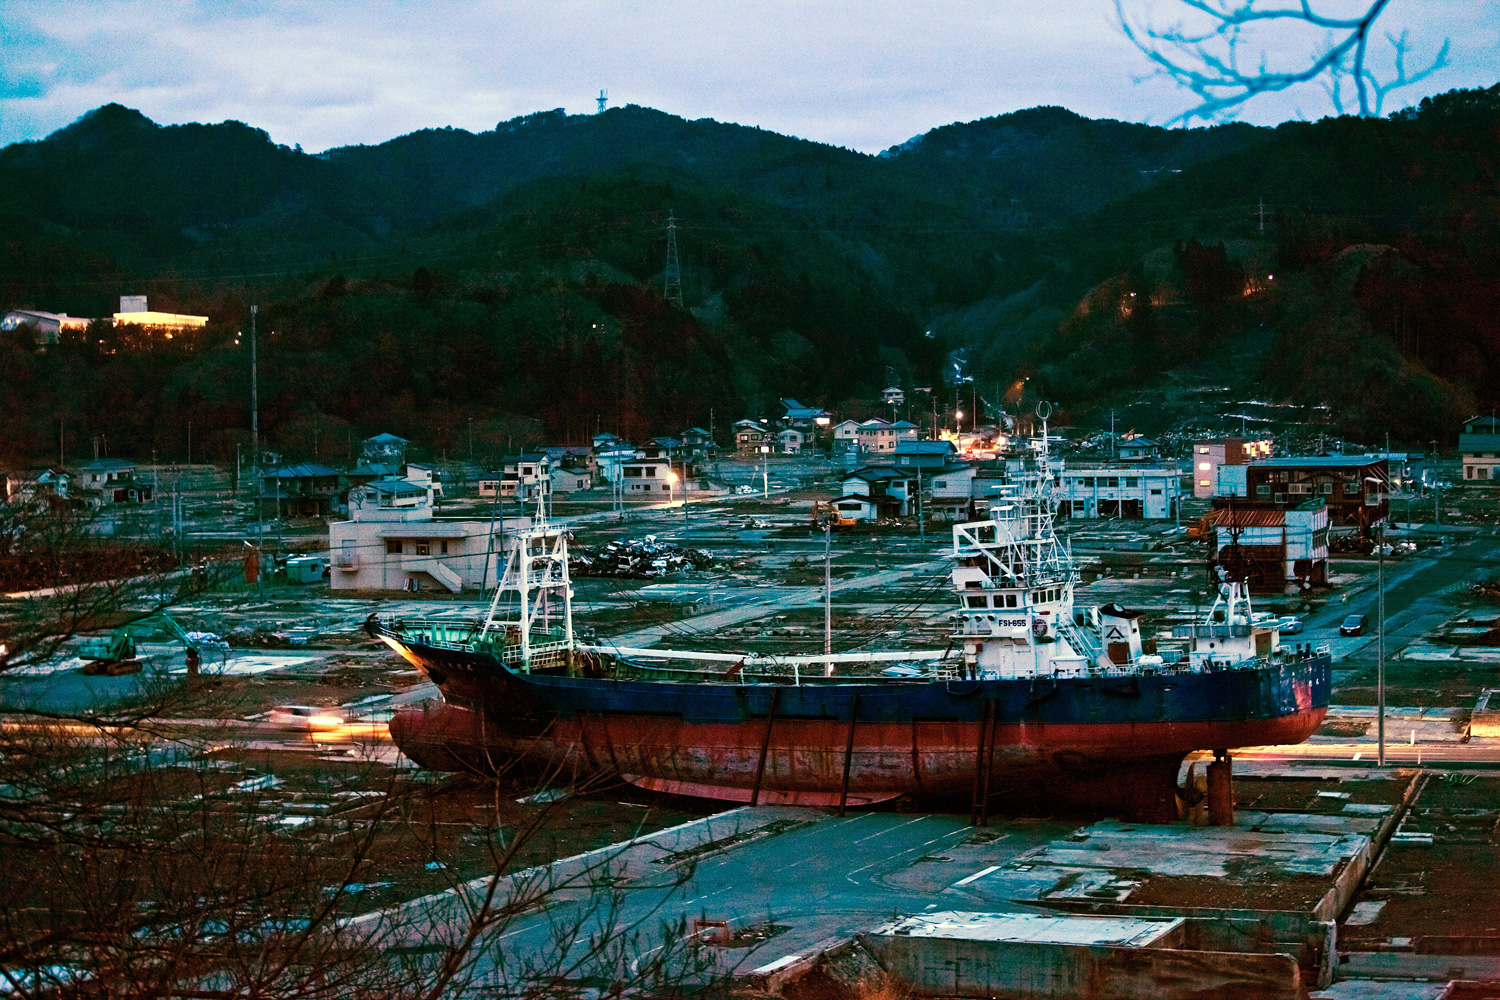 March 6, 2012. A fishing boat, dragged inland during last year's tsunami, sits on the ground in Kesennuma, Japan.